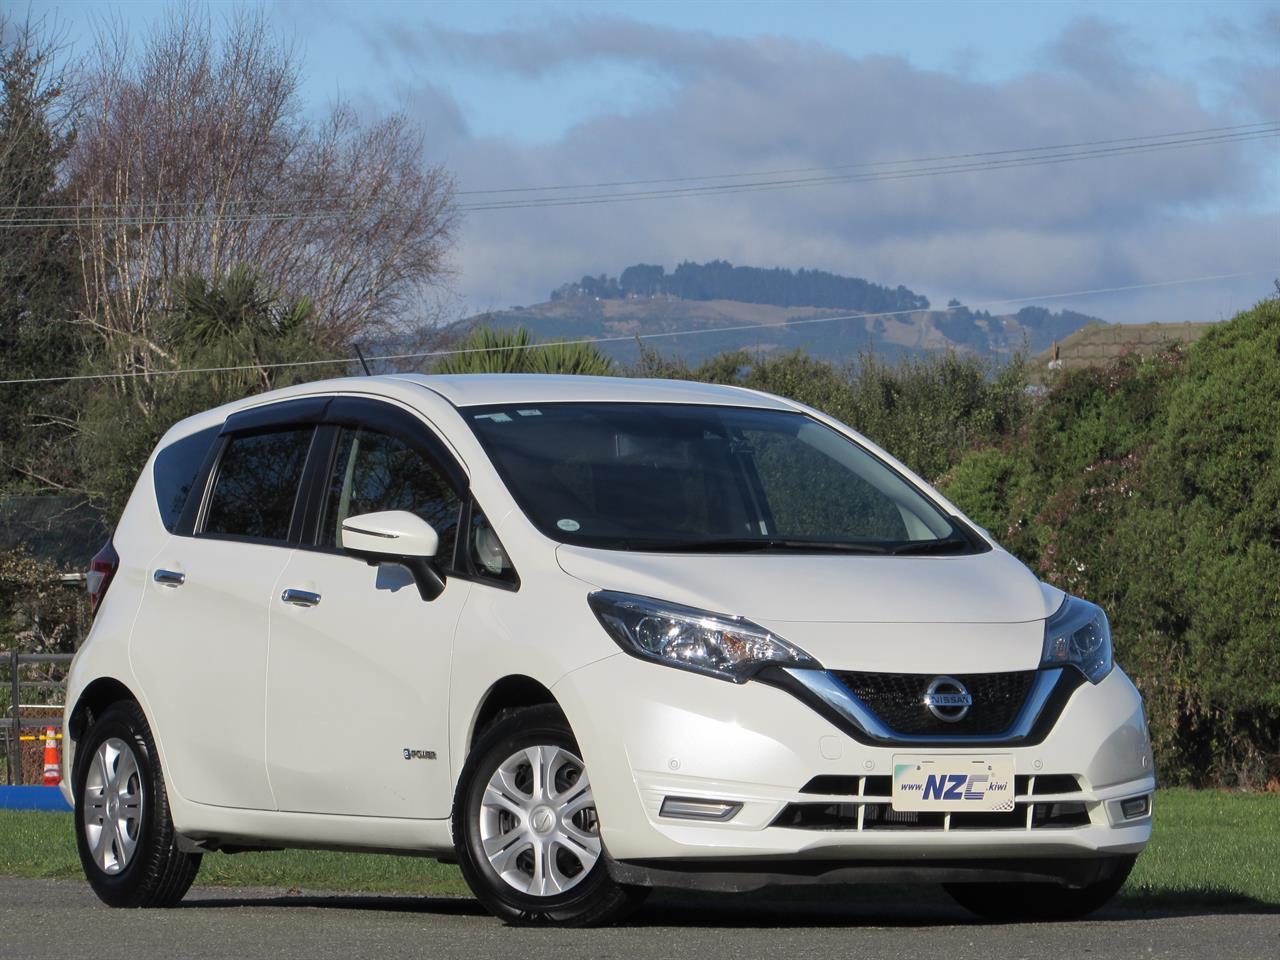 NZC best hot price for 2017 Nissan NOTE in Christchurch